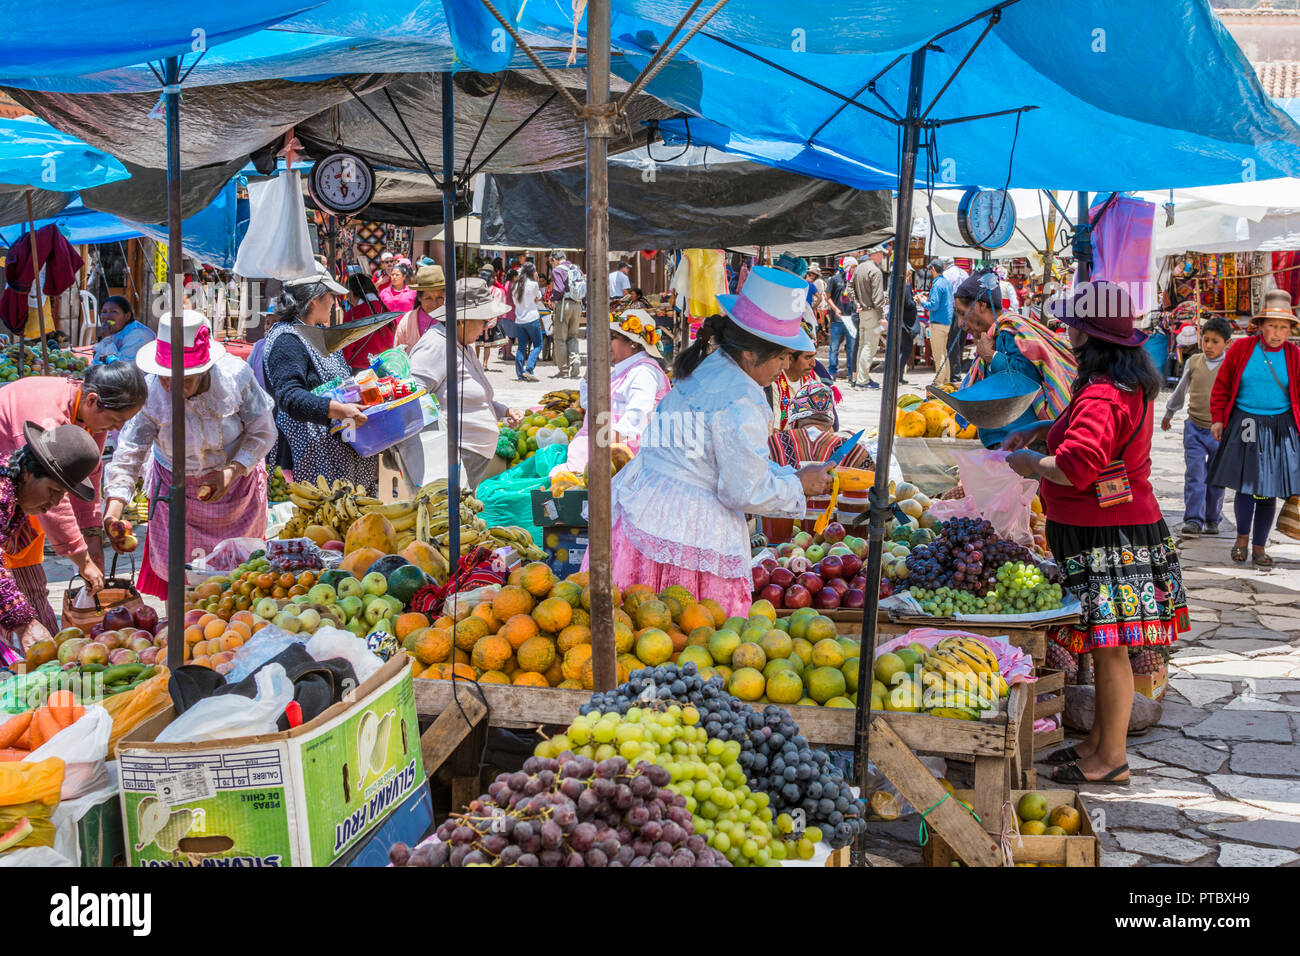 Peru women in colorful traditional clothing and hats sell fruits and vegetables at the Sunday Market in Pisac, Peru, South America. Stock Photo